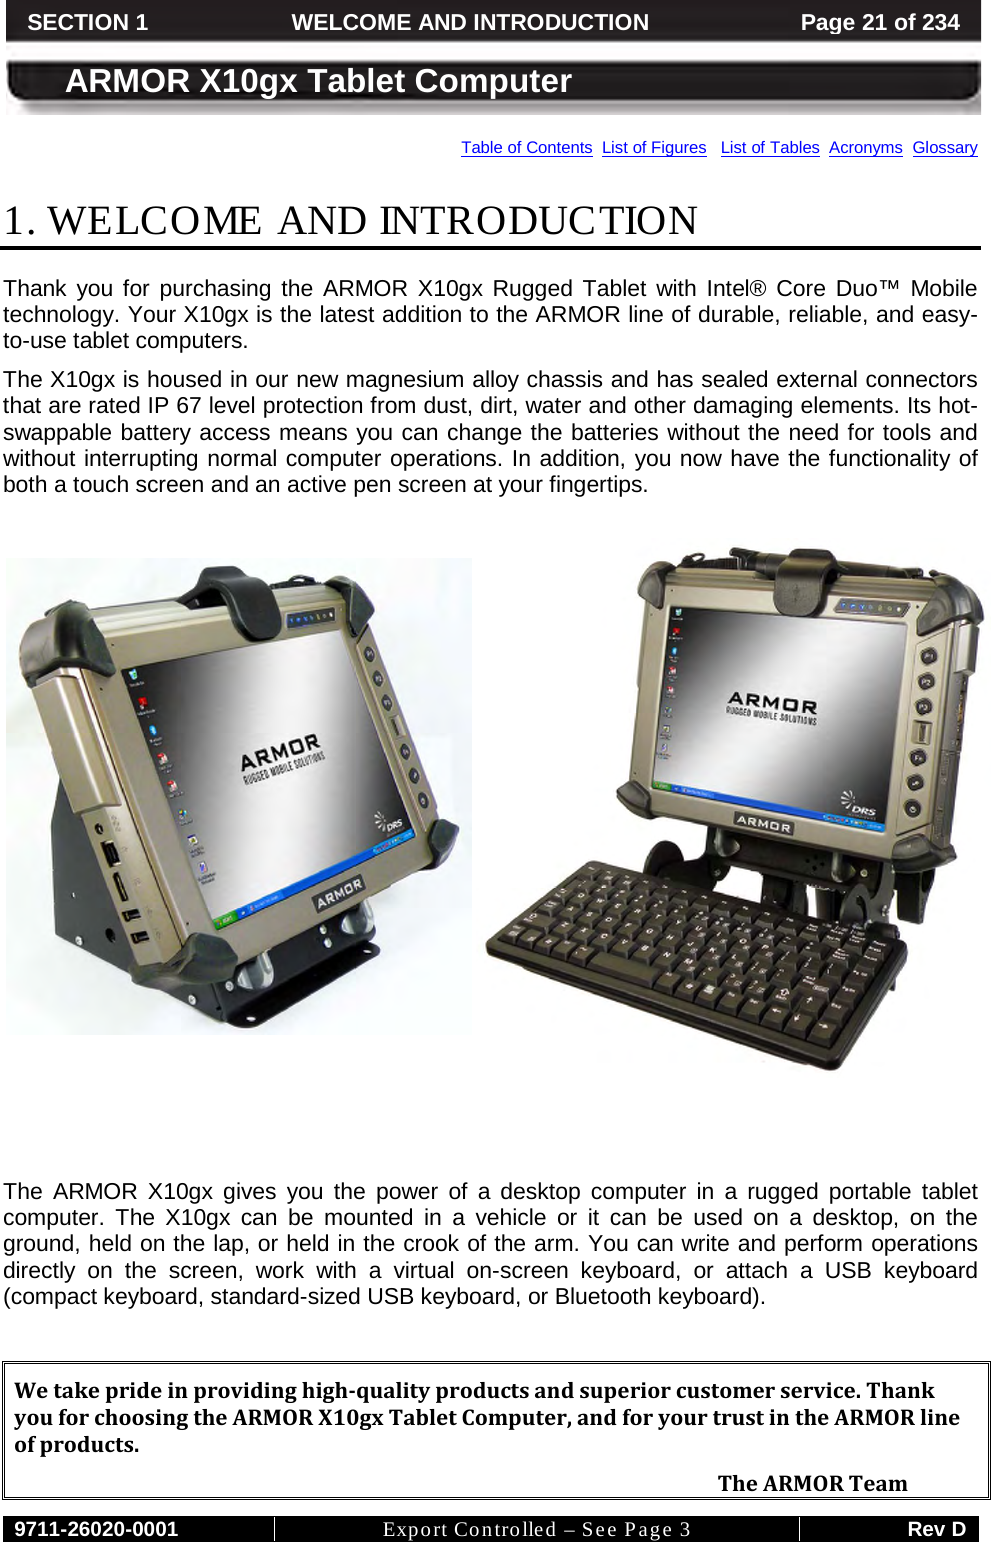     9711-26020-0001 Export Controlled – See Page 3 Rev D SECTION 1 WELCOME AND INTRODUCTION Page 21 of 234  ARMOR X10gx Tablet Computer Table of Contents  List of Figures   List of Tables  Acronyms  Glossary 1. WELCOME AND INTRODUCTION Thank you for purchasing the ARMOR X10gx Rugged Tablet with Intel® Core Duo™ Mobile technology. Your X10gx is the latest addition to the ARMOR line of durable, reliable, and easy-to-use tablet computers.  The X10gx is housed in our new magnesium alloy chassis and has sealed external connectors that are rated IP 67 level protection from dust, dirt, water and other damaging elements. Its hot-swappable battery access means you can change the batteries without the need for tools and without interrupting normal computer operations. In addition, you now have the functionality of both a touch screen and an active pen screen at your fingertips.          The ARMOR X10gx gives you the power of a desktop computer in a rugged portable tablet computer. The X10gx can be mounted in a vehicle or it can be used on a desktop, on the ground, held on the lap, or held in the crook of the arm. You can write and perform operations directly on the screen, work with a virtual on-screen keyboard, or attach a USB keyboard (compact keyboard, standard-sized USB keyboard, or Bluetooth keyboard).   We take pride in providing high-quality products and superior customer service. Thank you for choosing the ARMOR X10gx Tablet Computer, and for your trust in the ARMOR line of products.     The ARMOR Team 